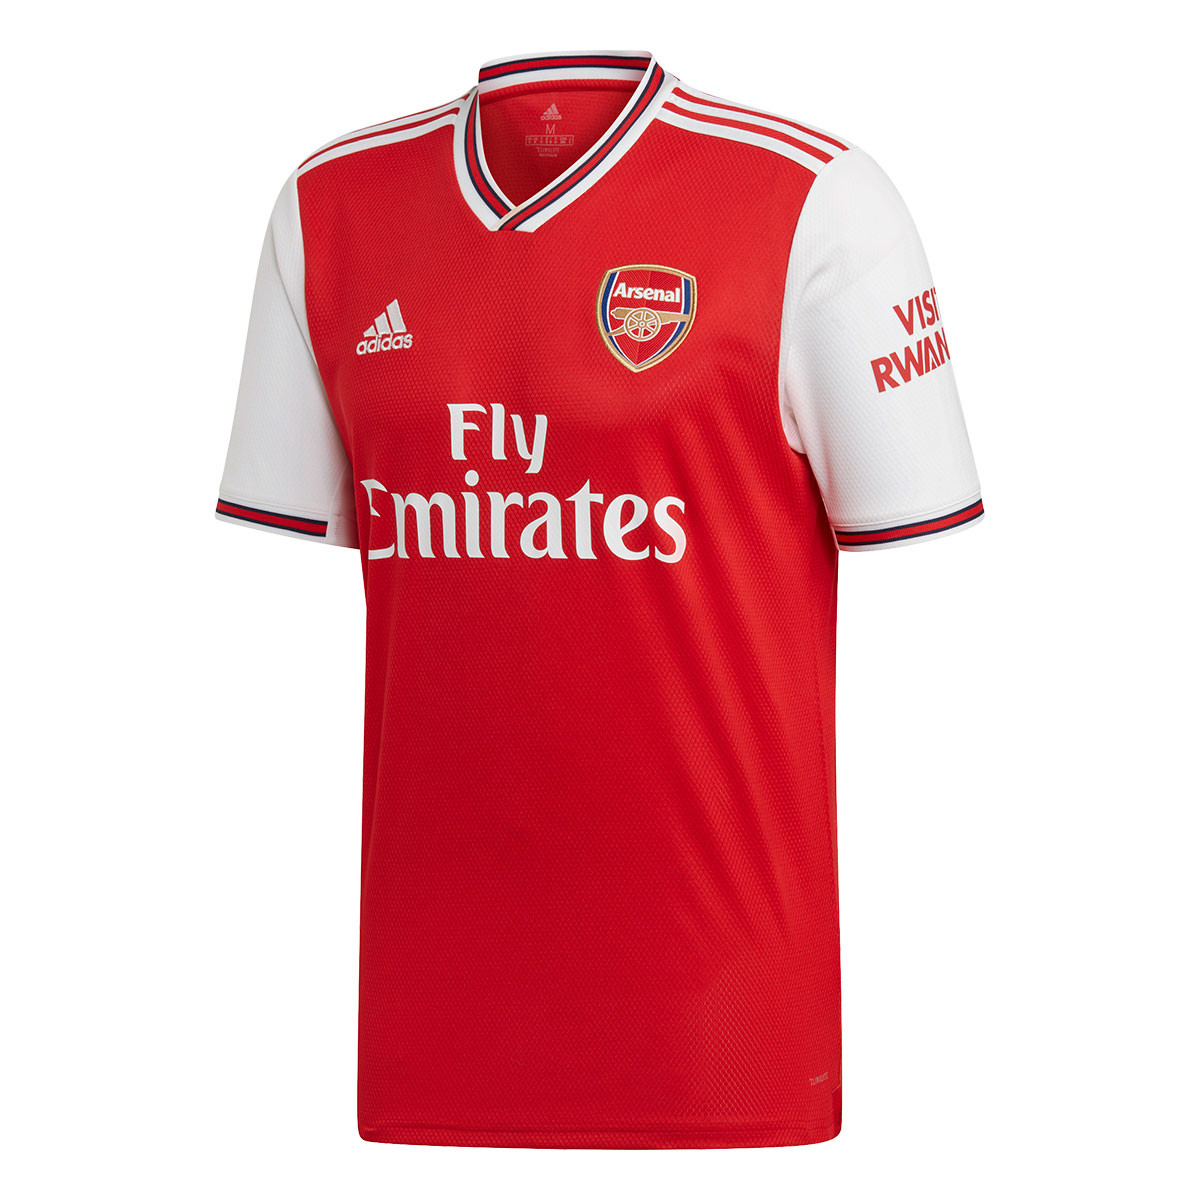 Jersey Adidas Arsenal Fc 2019 2020 Home Scarlet Football Store